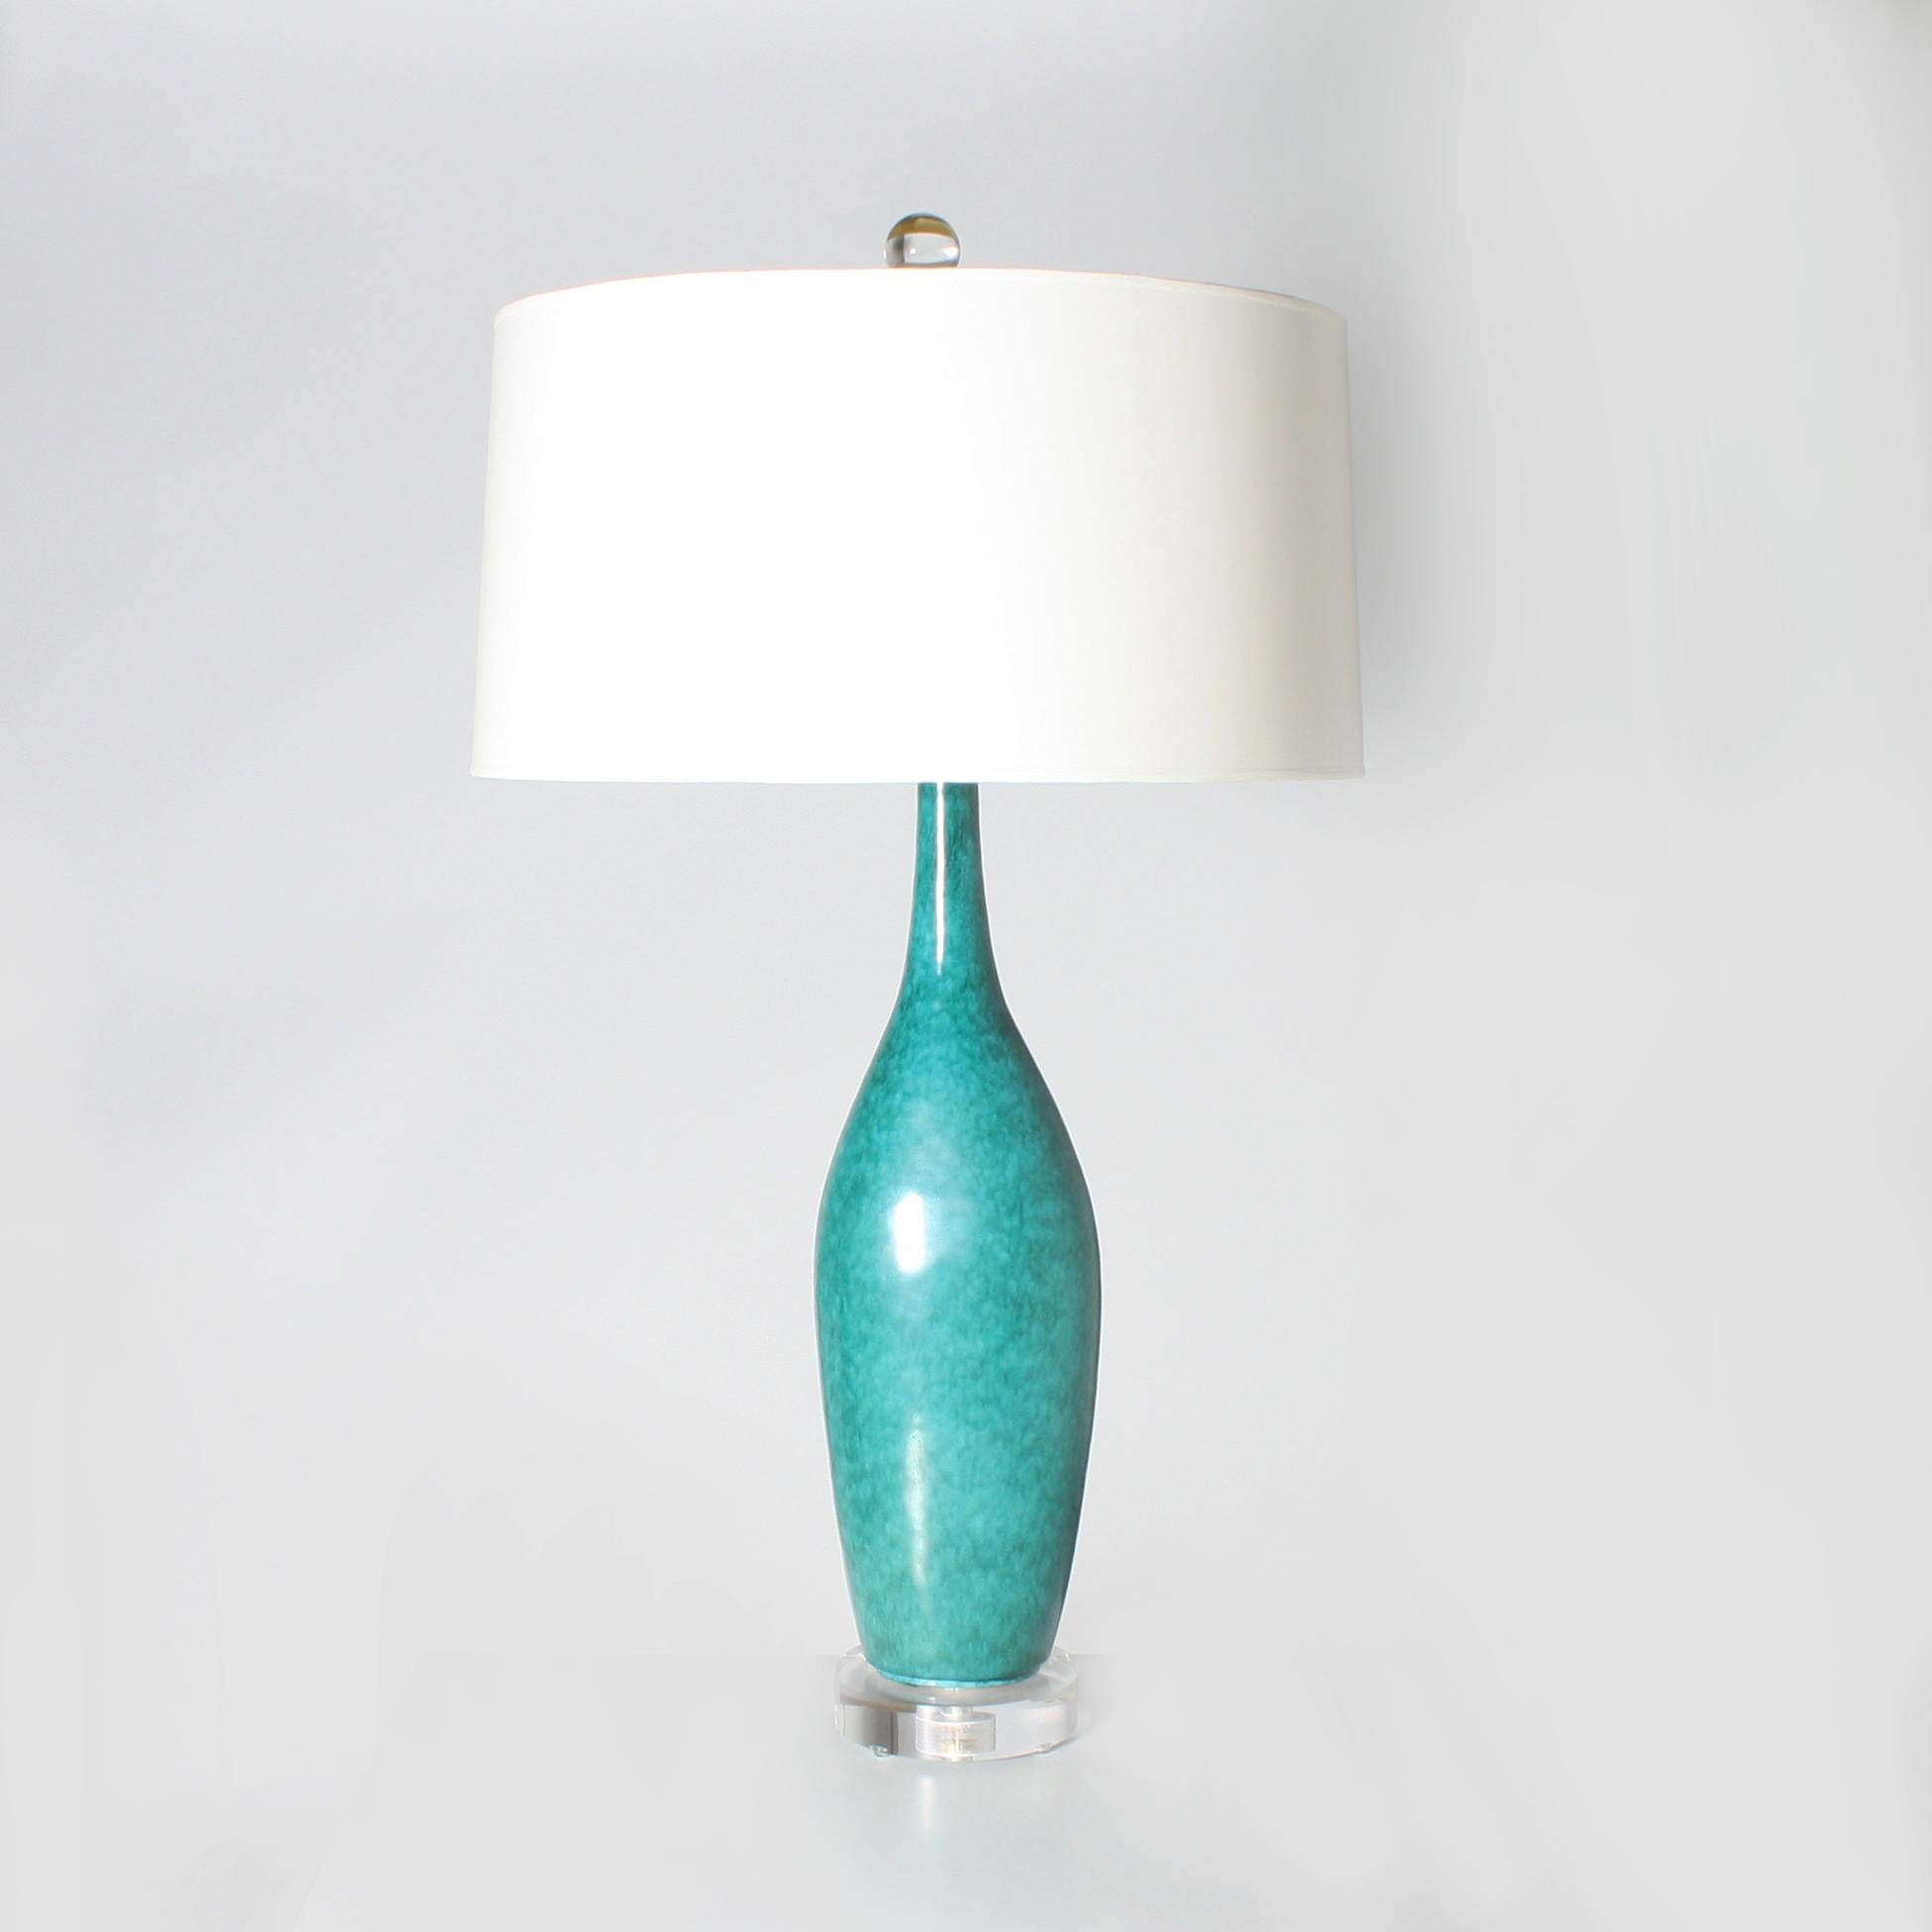 Italian turquoise Marcello Fantoni ceramic lamp. Ivory lacquer shade with gold foil interior. Three way socket, 50/100/150 watt. Brass hardware. Lucite base. Crystal ball finial. Gold twisted cording.